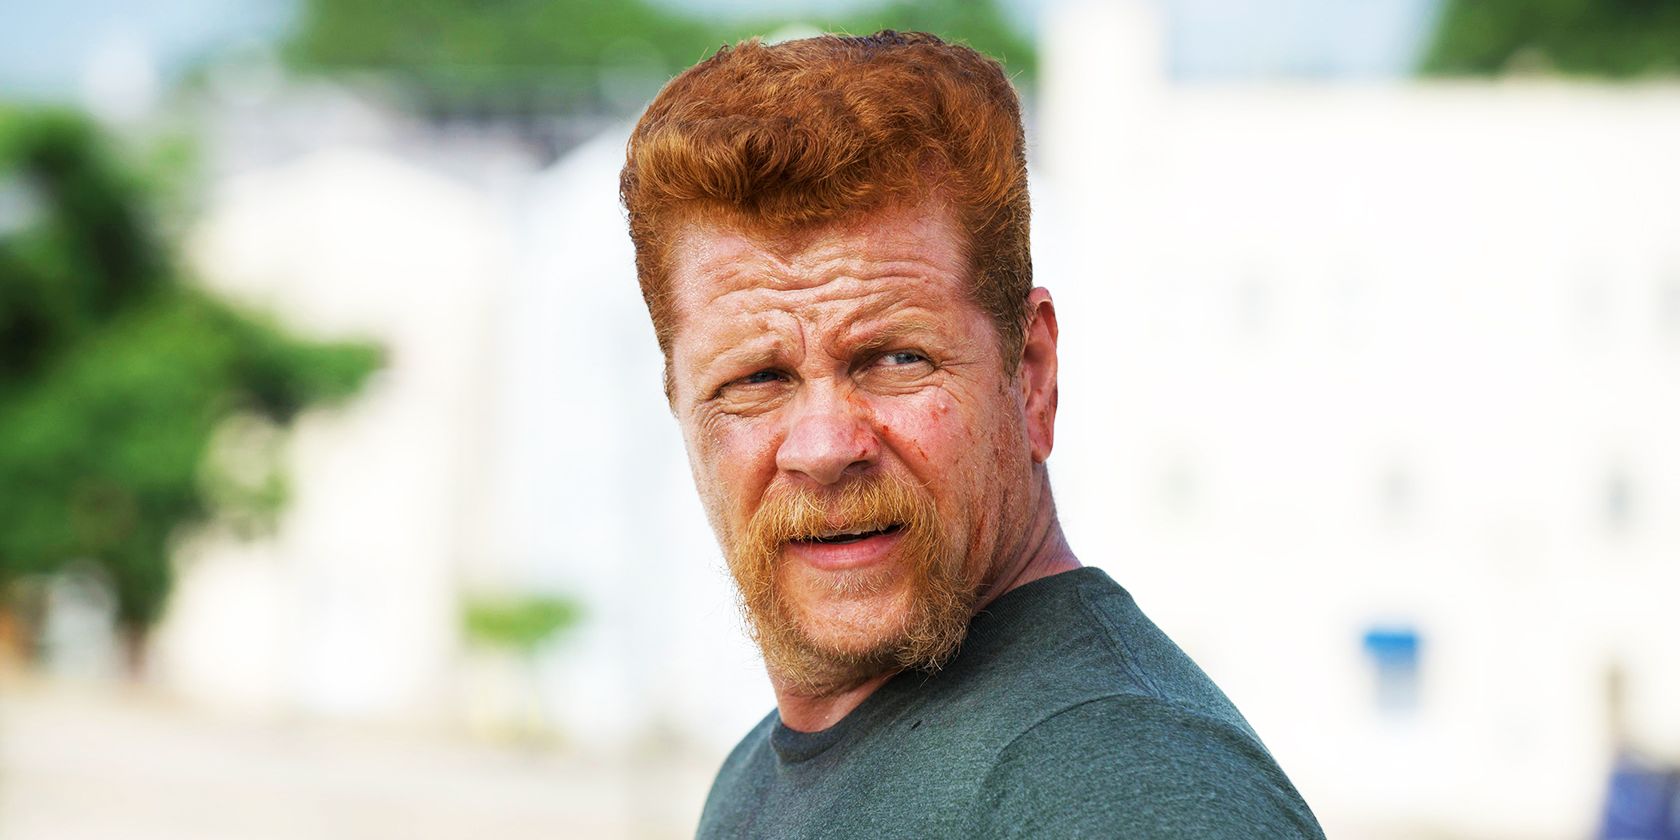 Abraham turning back and looking into the distance in The Walking Dead